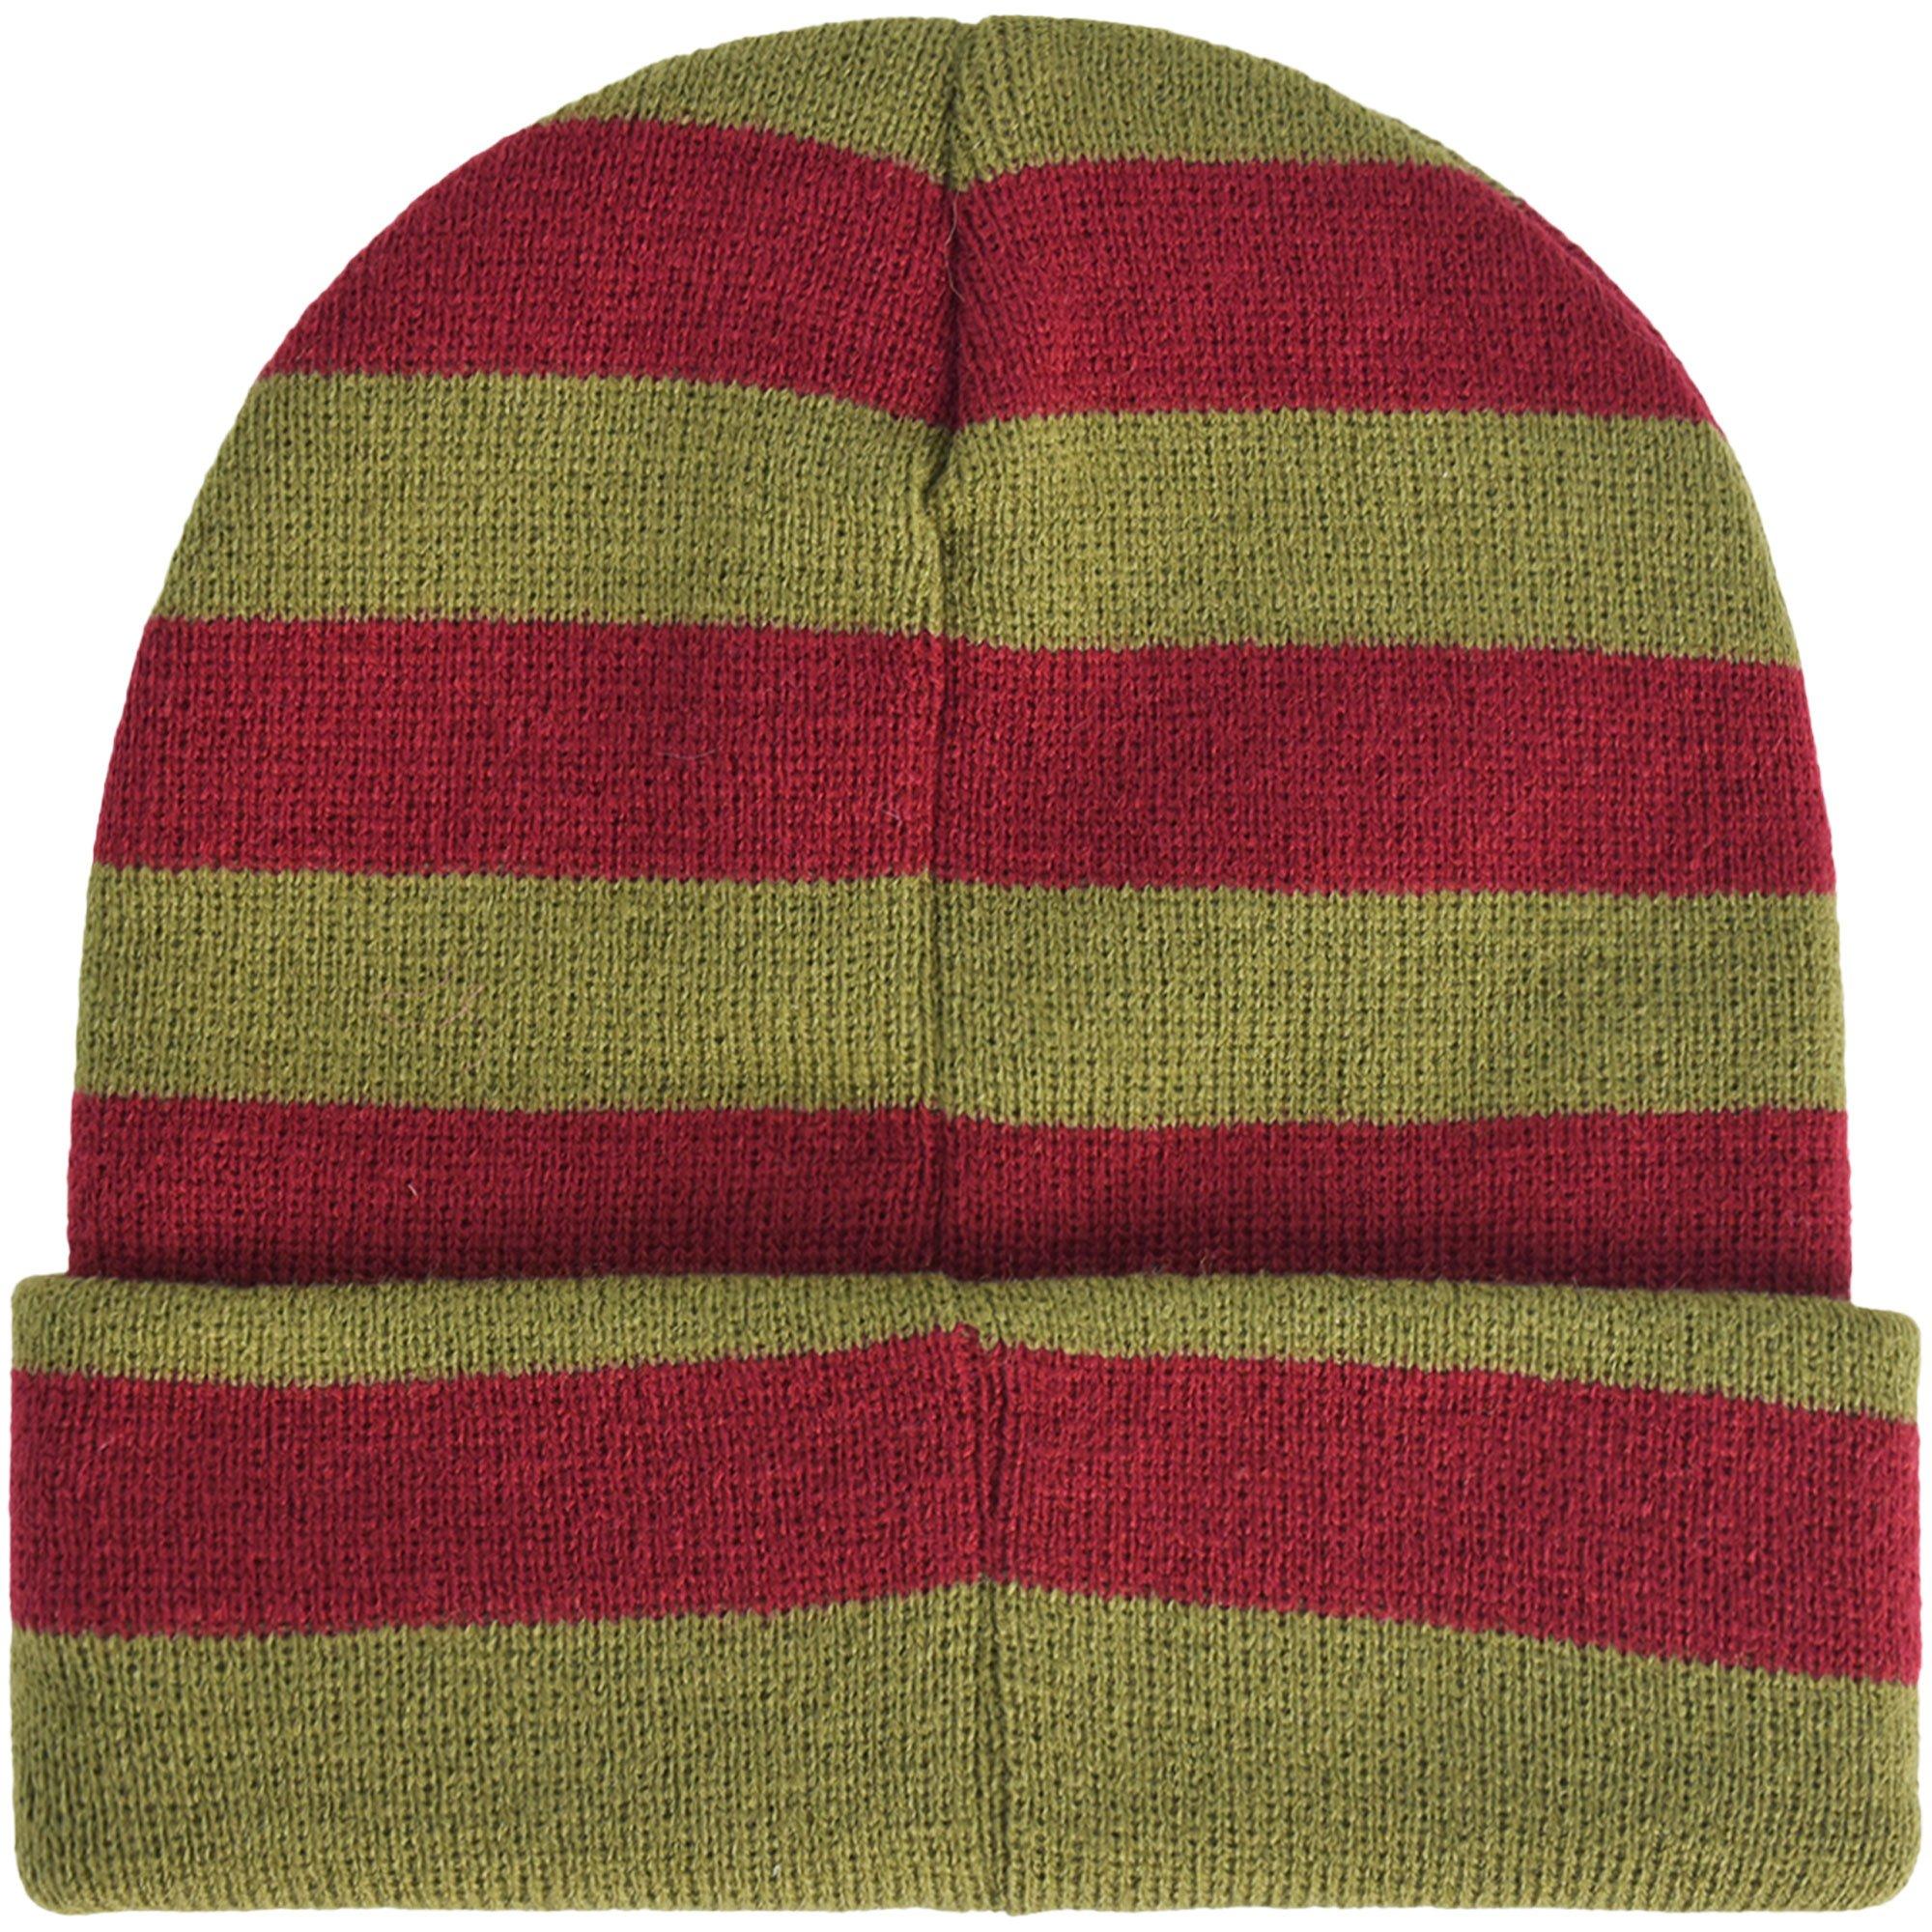 Green & Red Embroidered Freddy Krueger Glove Striped Acrylic Knit Beanie - A Nightmare on Elm Street